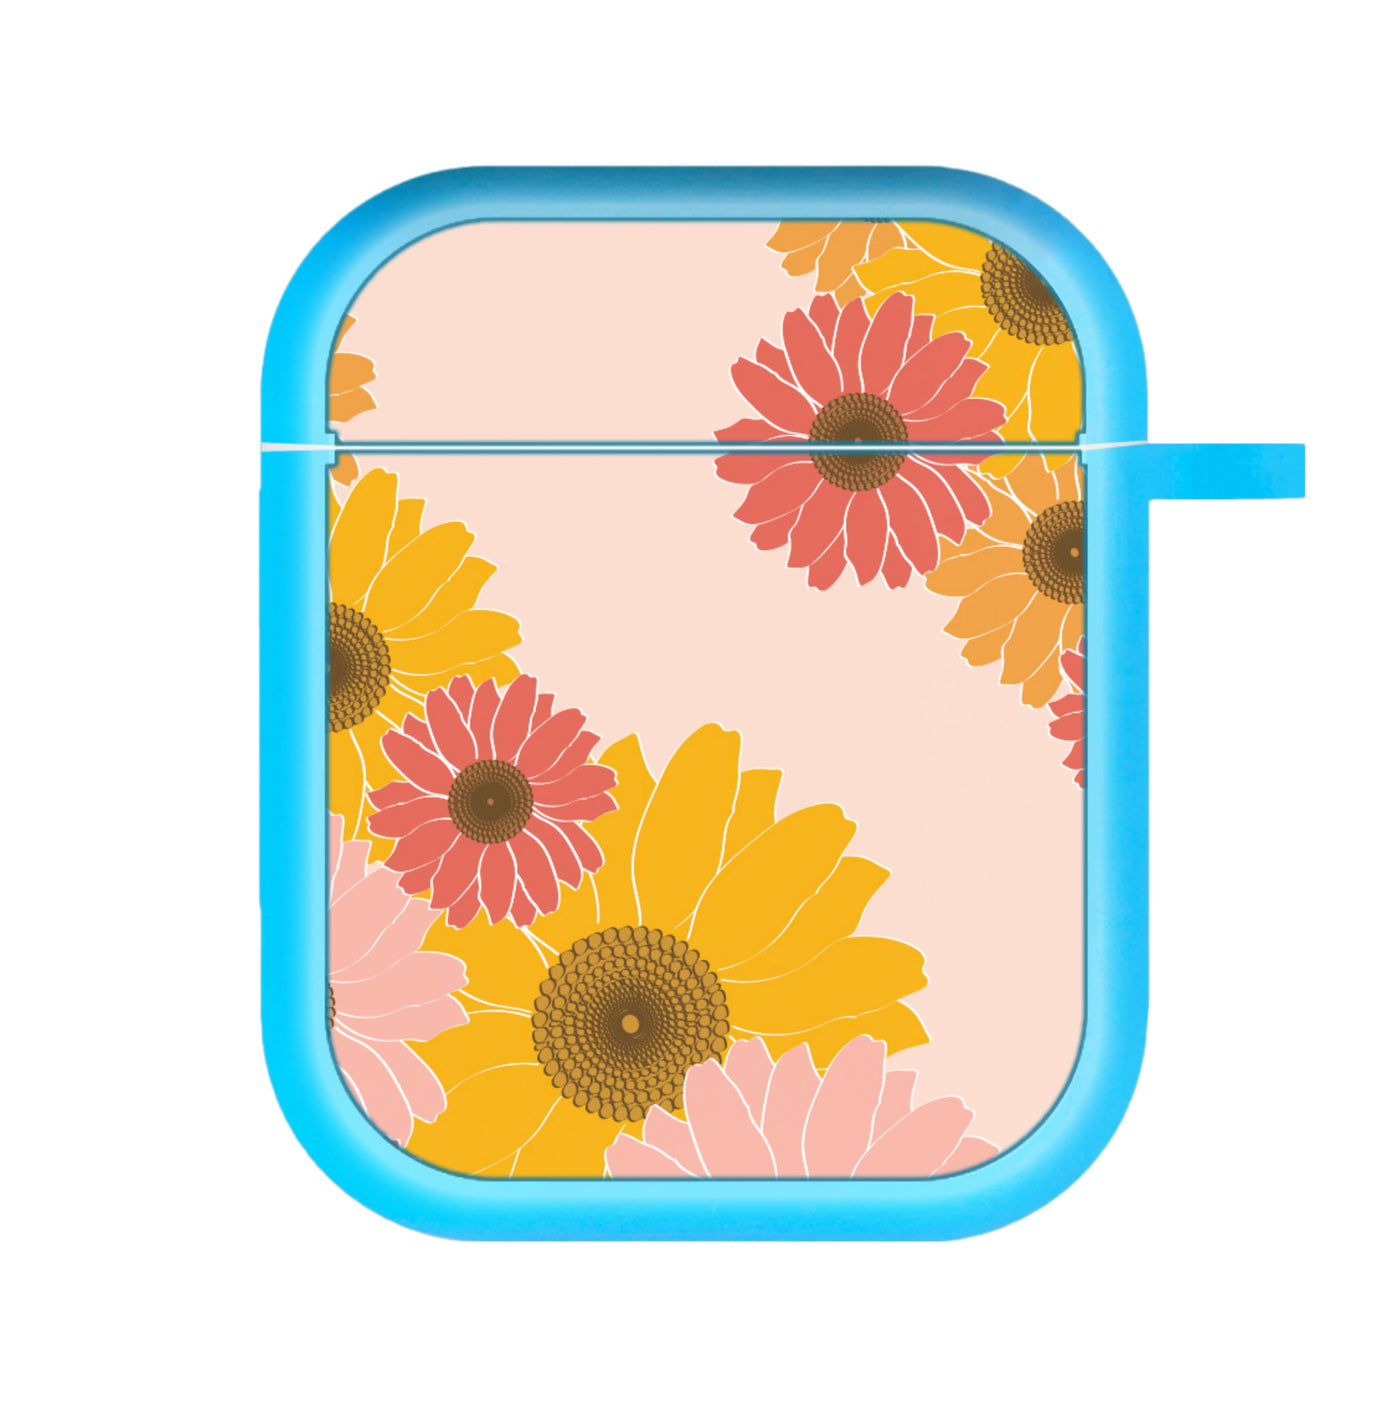 Sunflower Floral Pattern AirPods Case